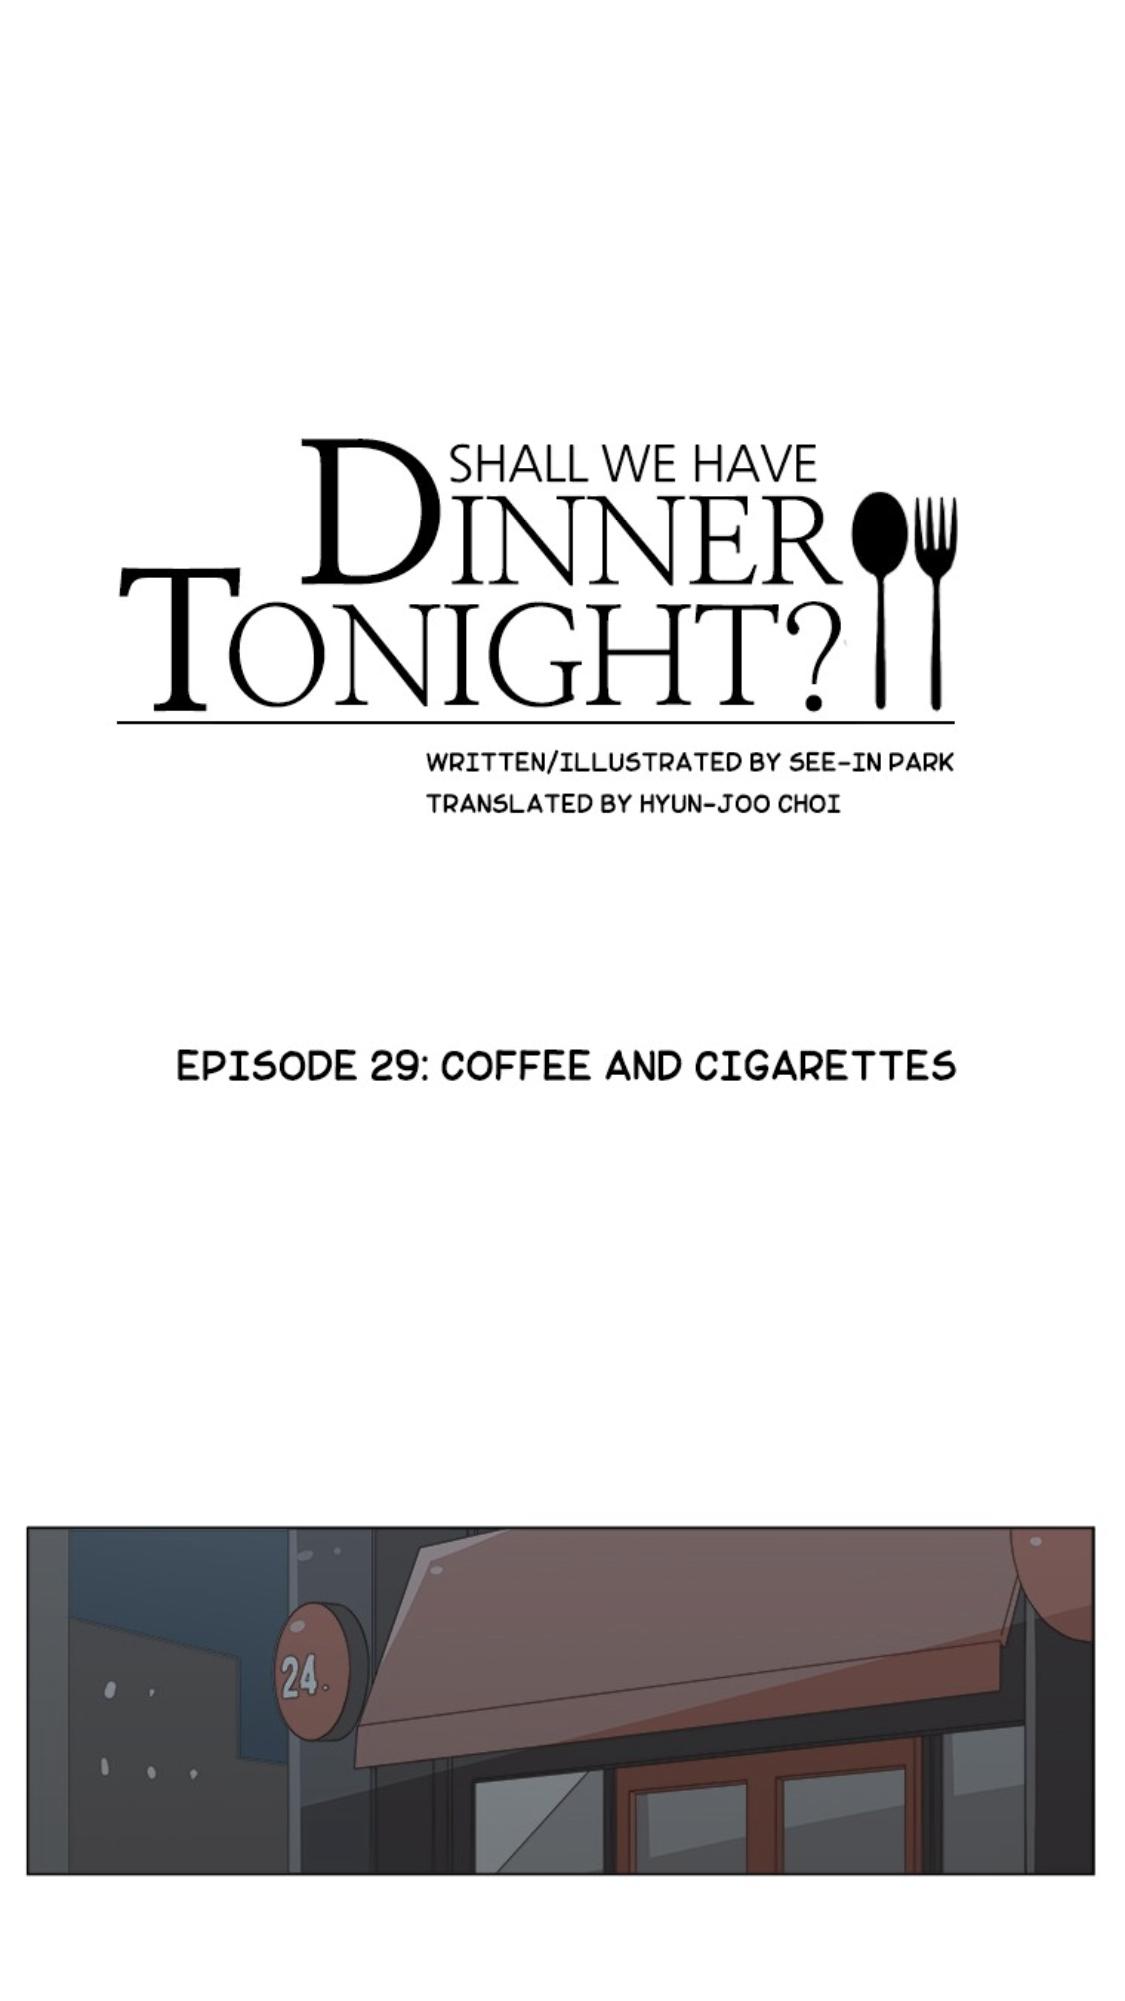 How about having Dinner together? - episode 30 - 8